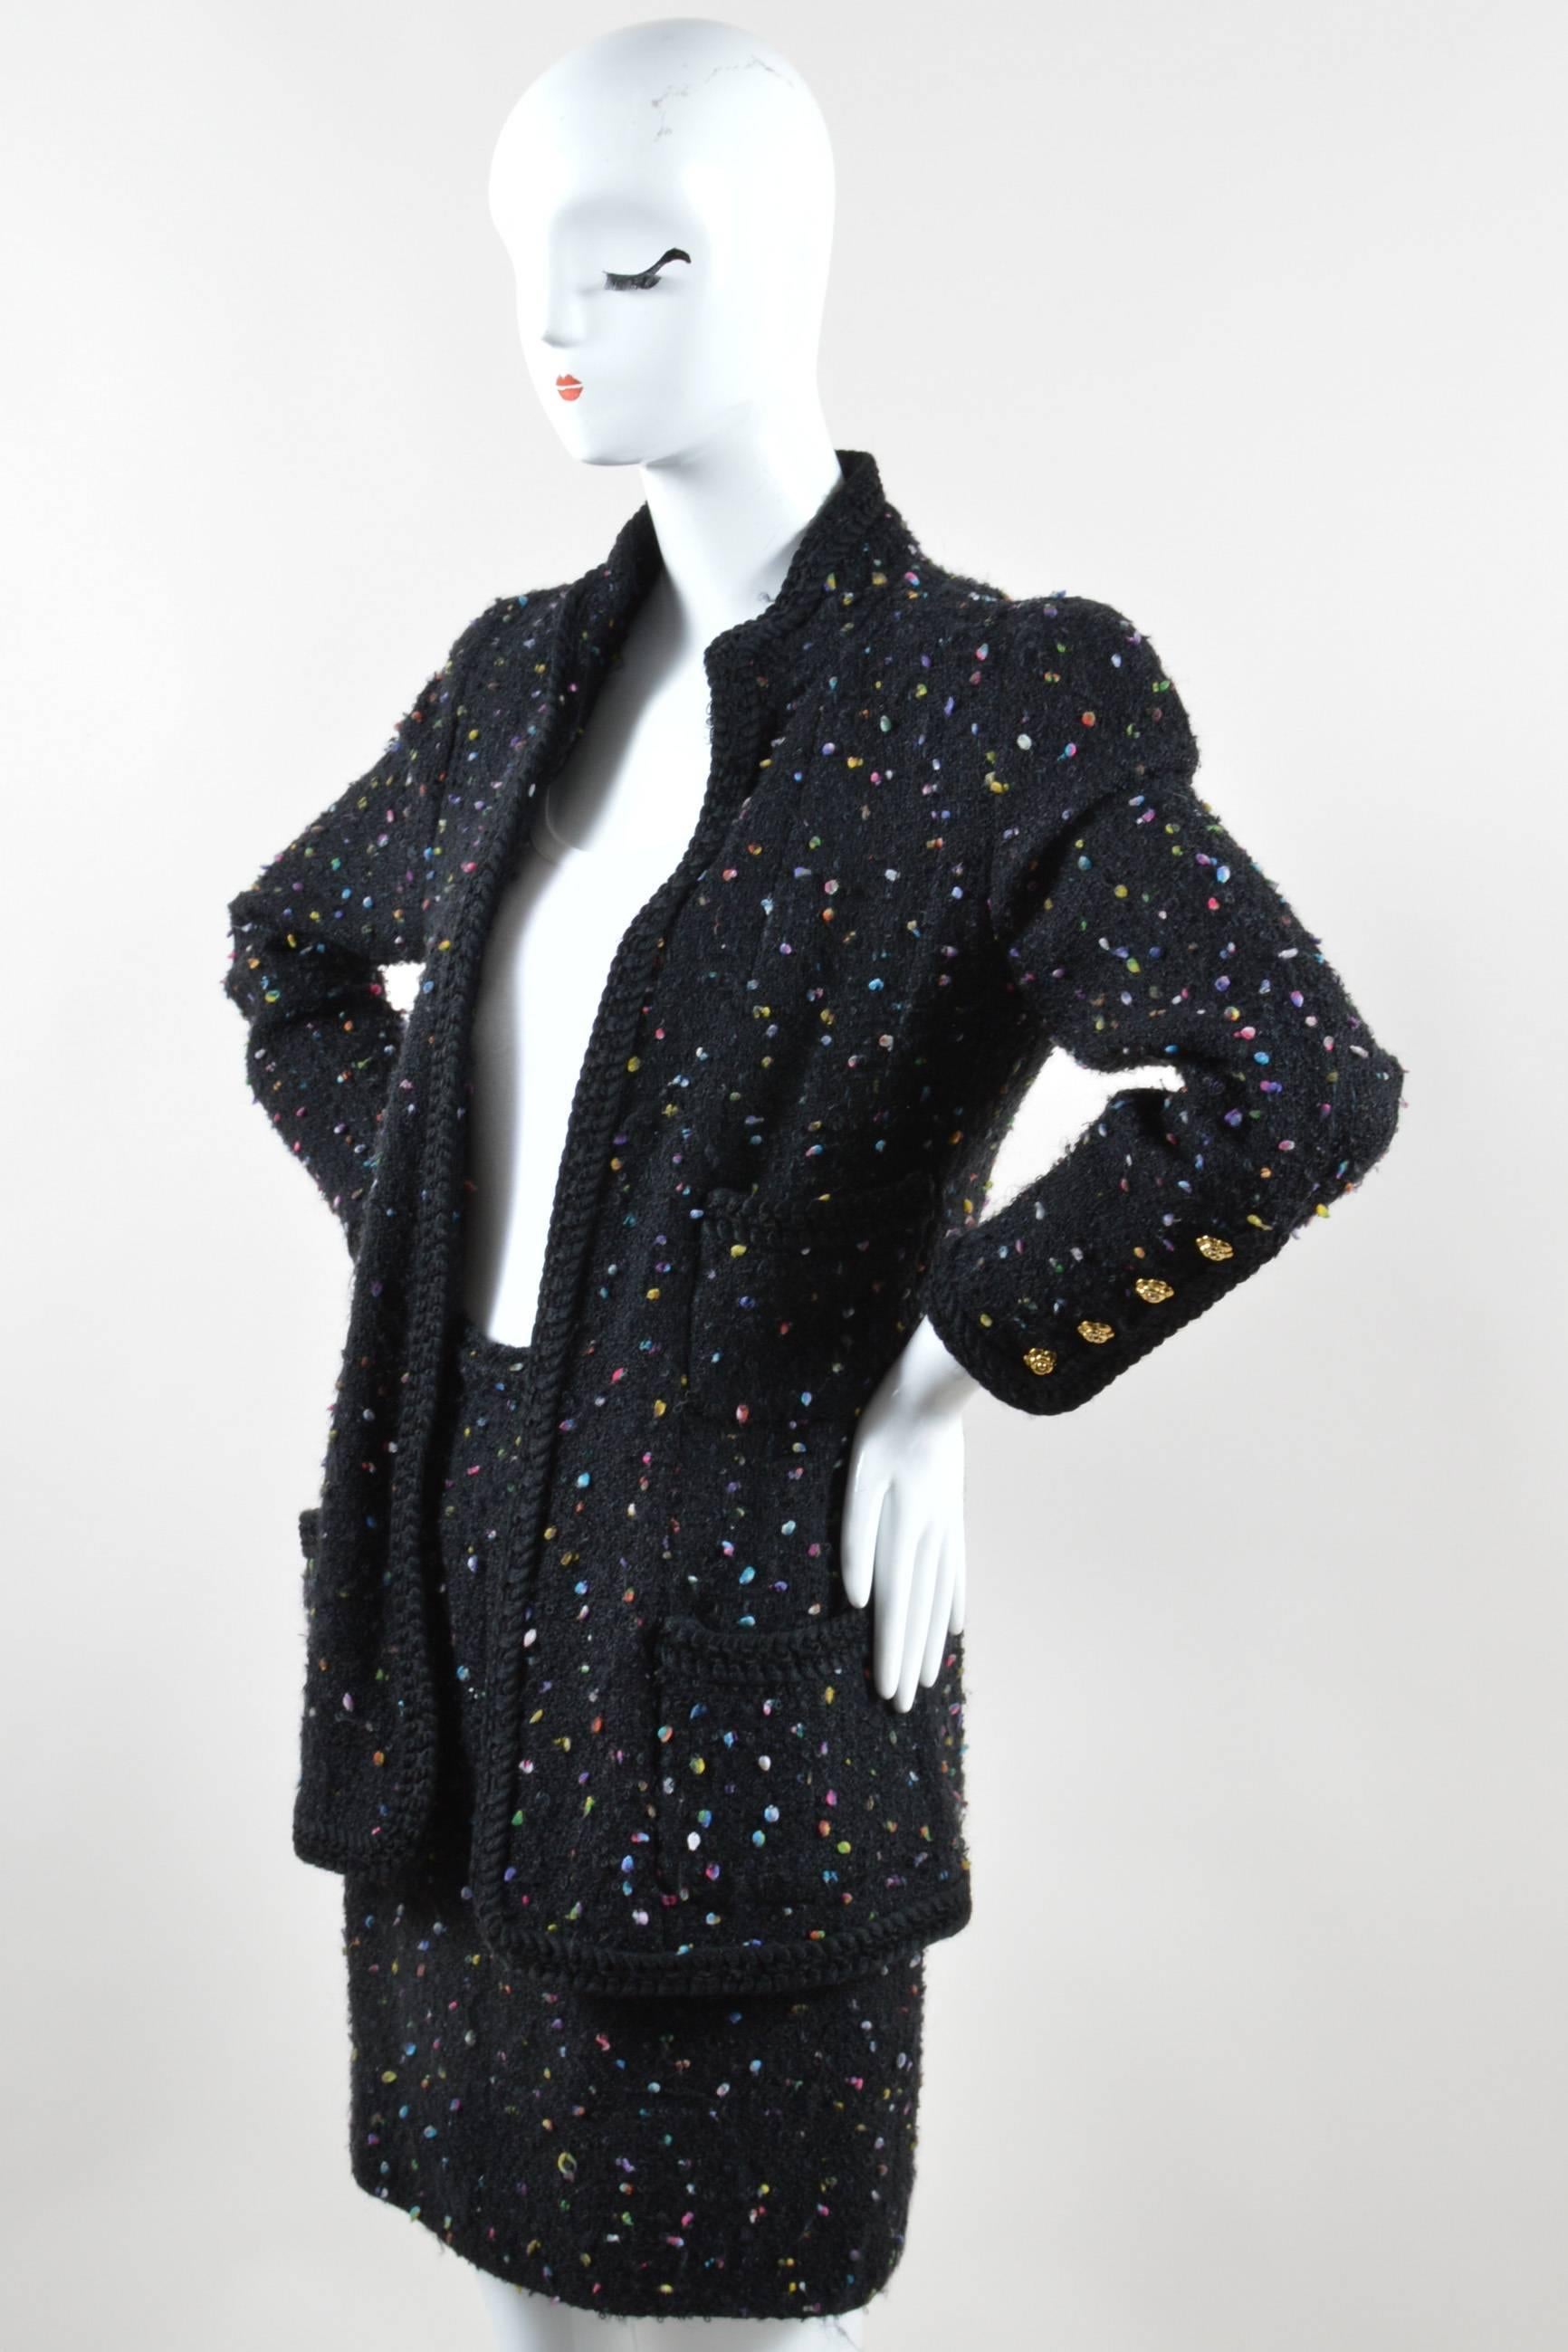 Chic suit that can be worn together or separate. Speckled multicolor applique embellishment. Jacket: High collar. Hits at hips. Woven trim. Front patch pockets. Padded shoulders. Embellished camellia buttons. Button closure at bottom of sleeves.